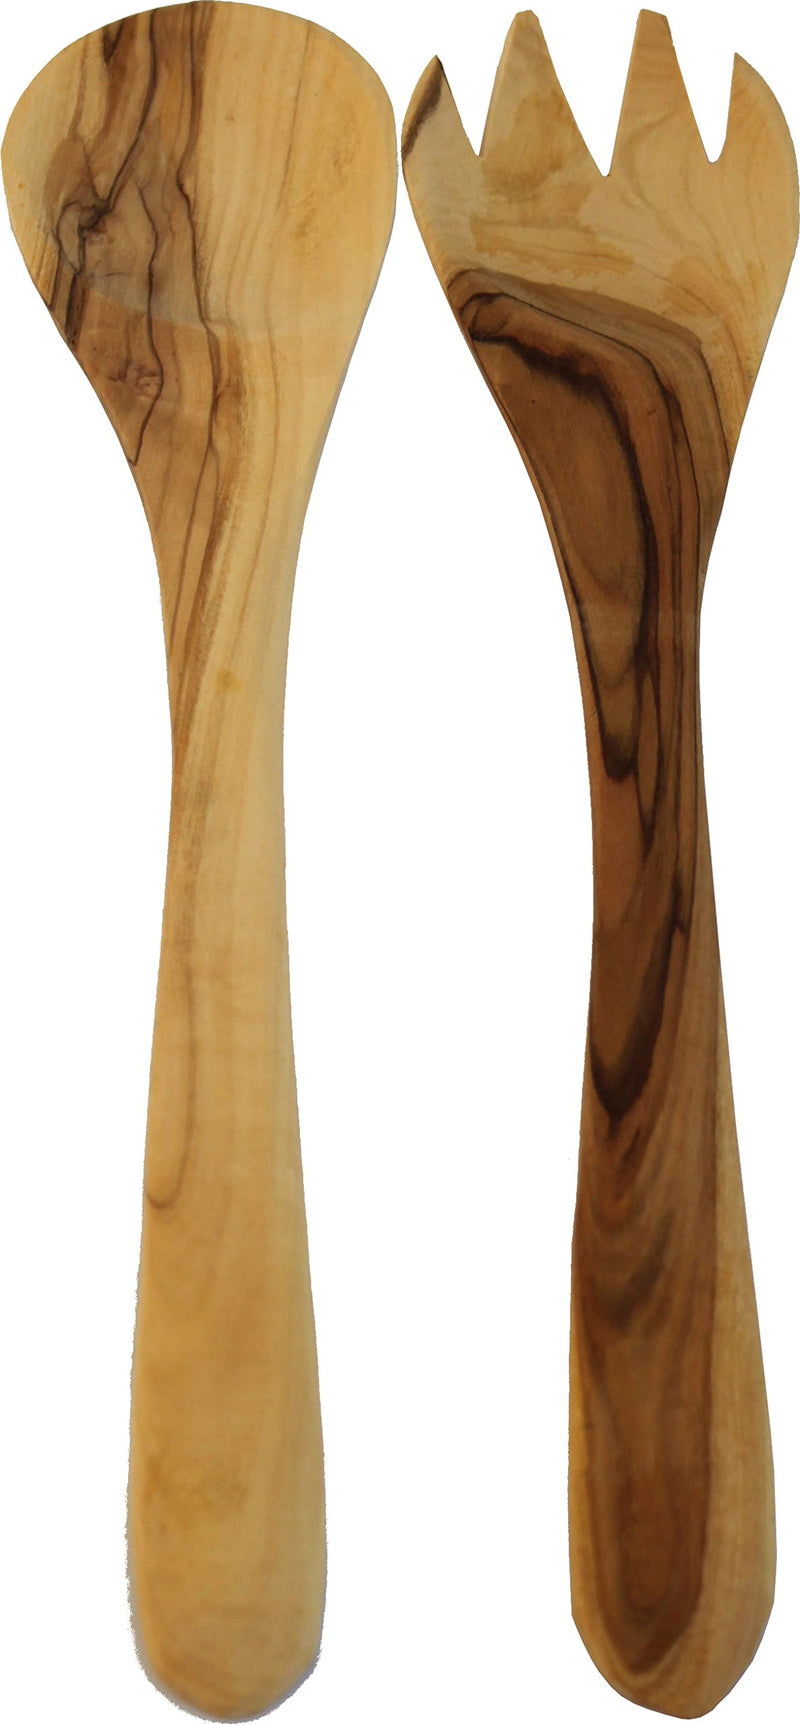 Holy Land Market Olive Wood Utensils Set - Medium Spoon and Fork (33 cm or 13 inches) - Asfour Outlet Trademark